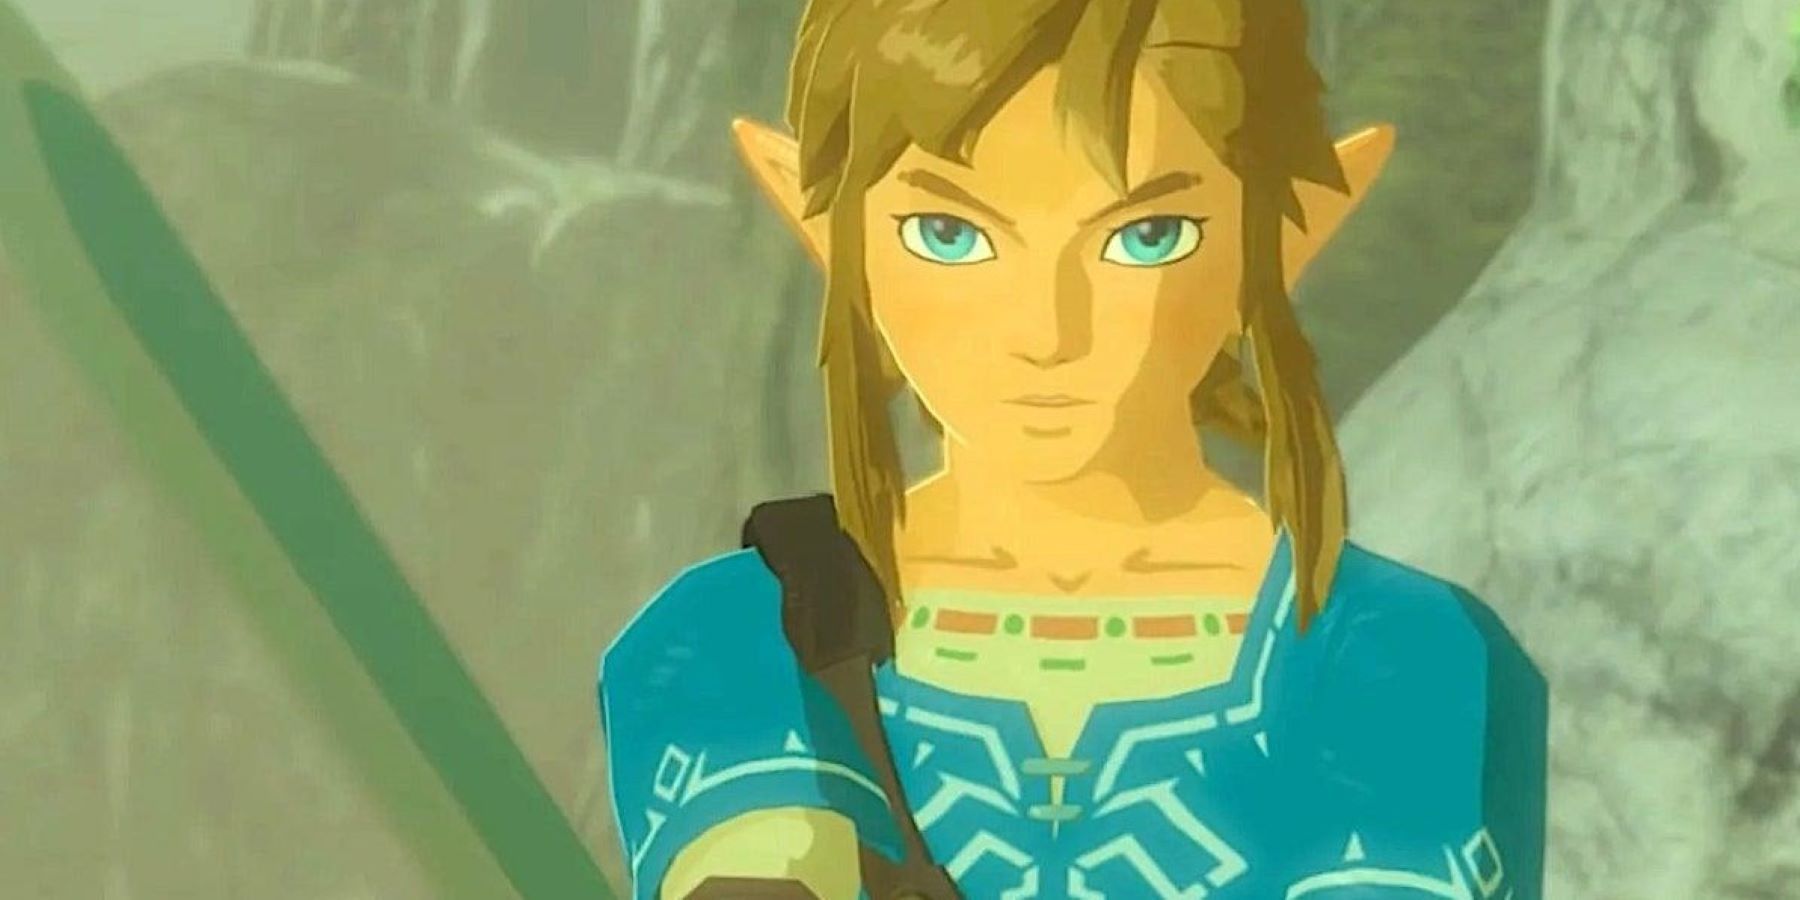 Link wearing the Champion's Tunic and brandishing a sword in The Legend of Zelda: Breath of the Wild